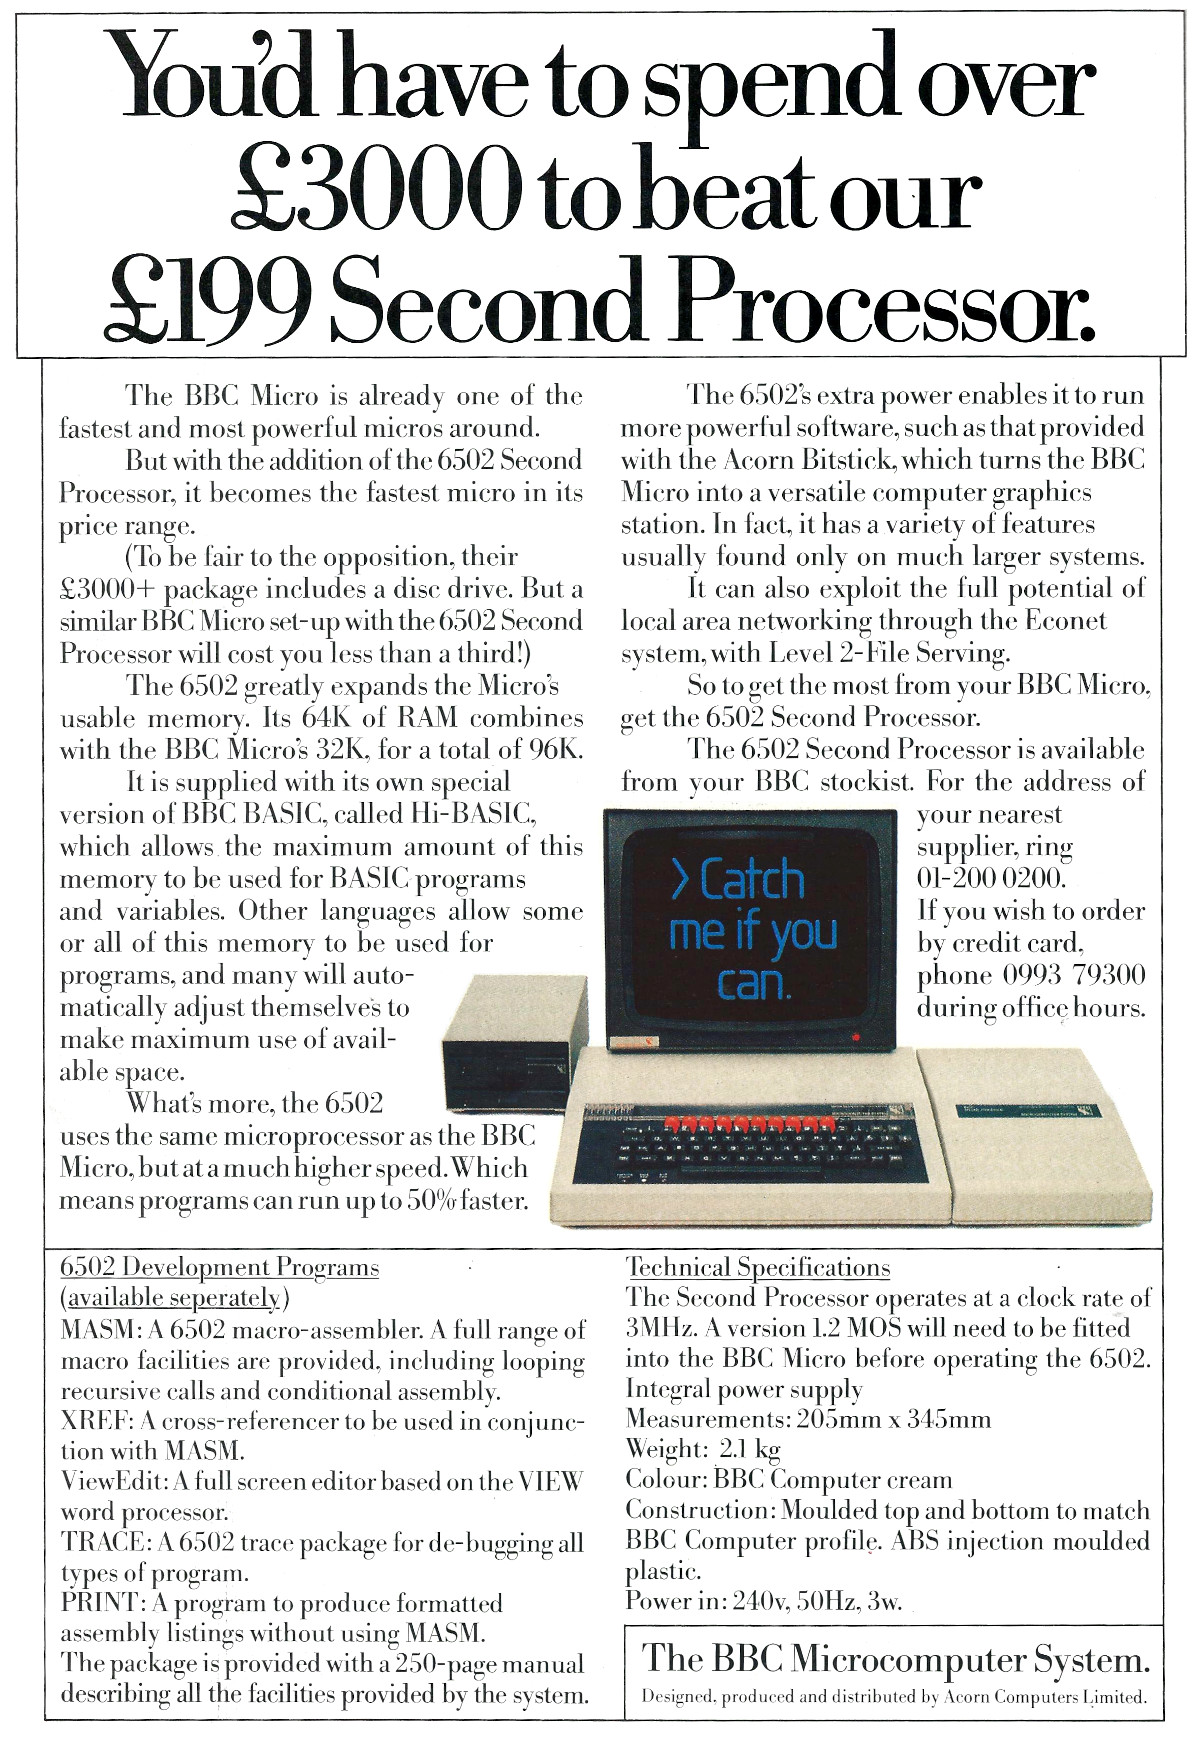 Catch me if you can: an advert for Acorn's 6502 second processor, retailing for £199, which is about £750 in 2024. From Acorn User, September 1984